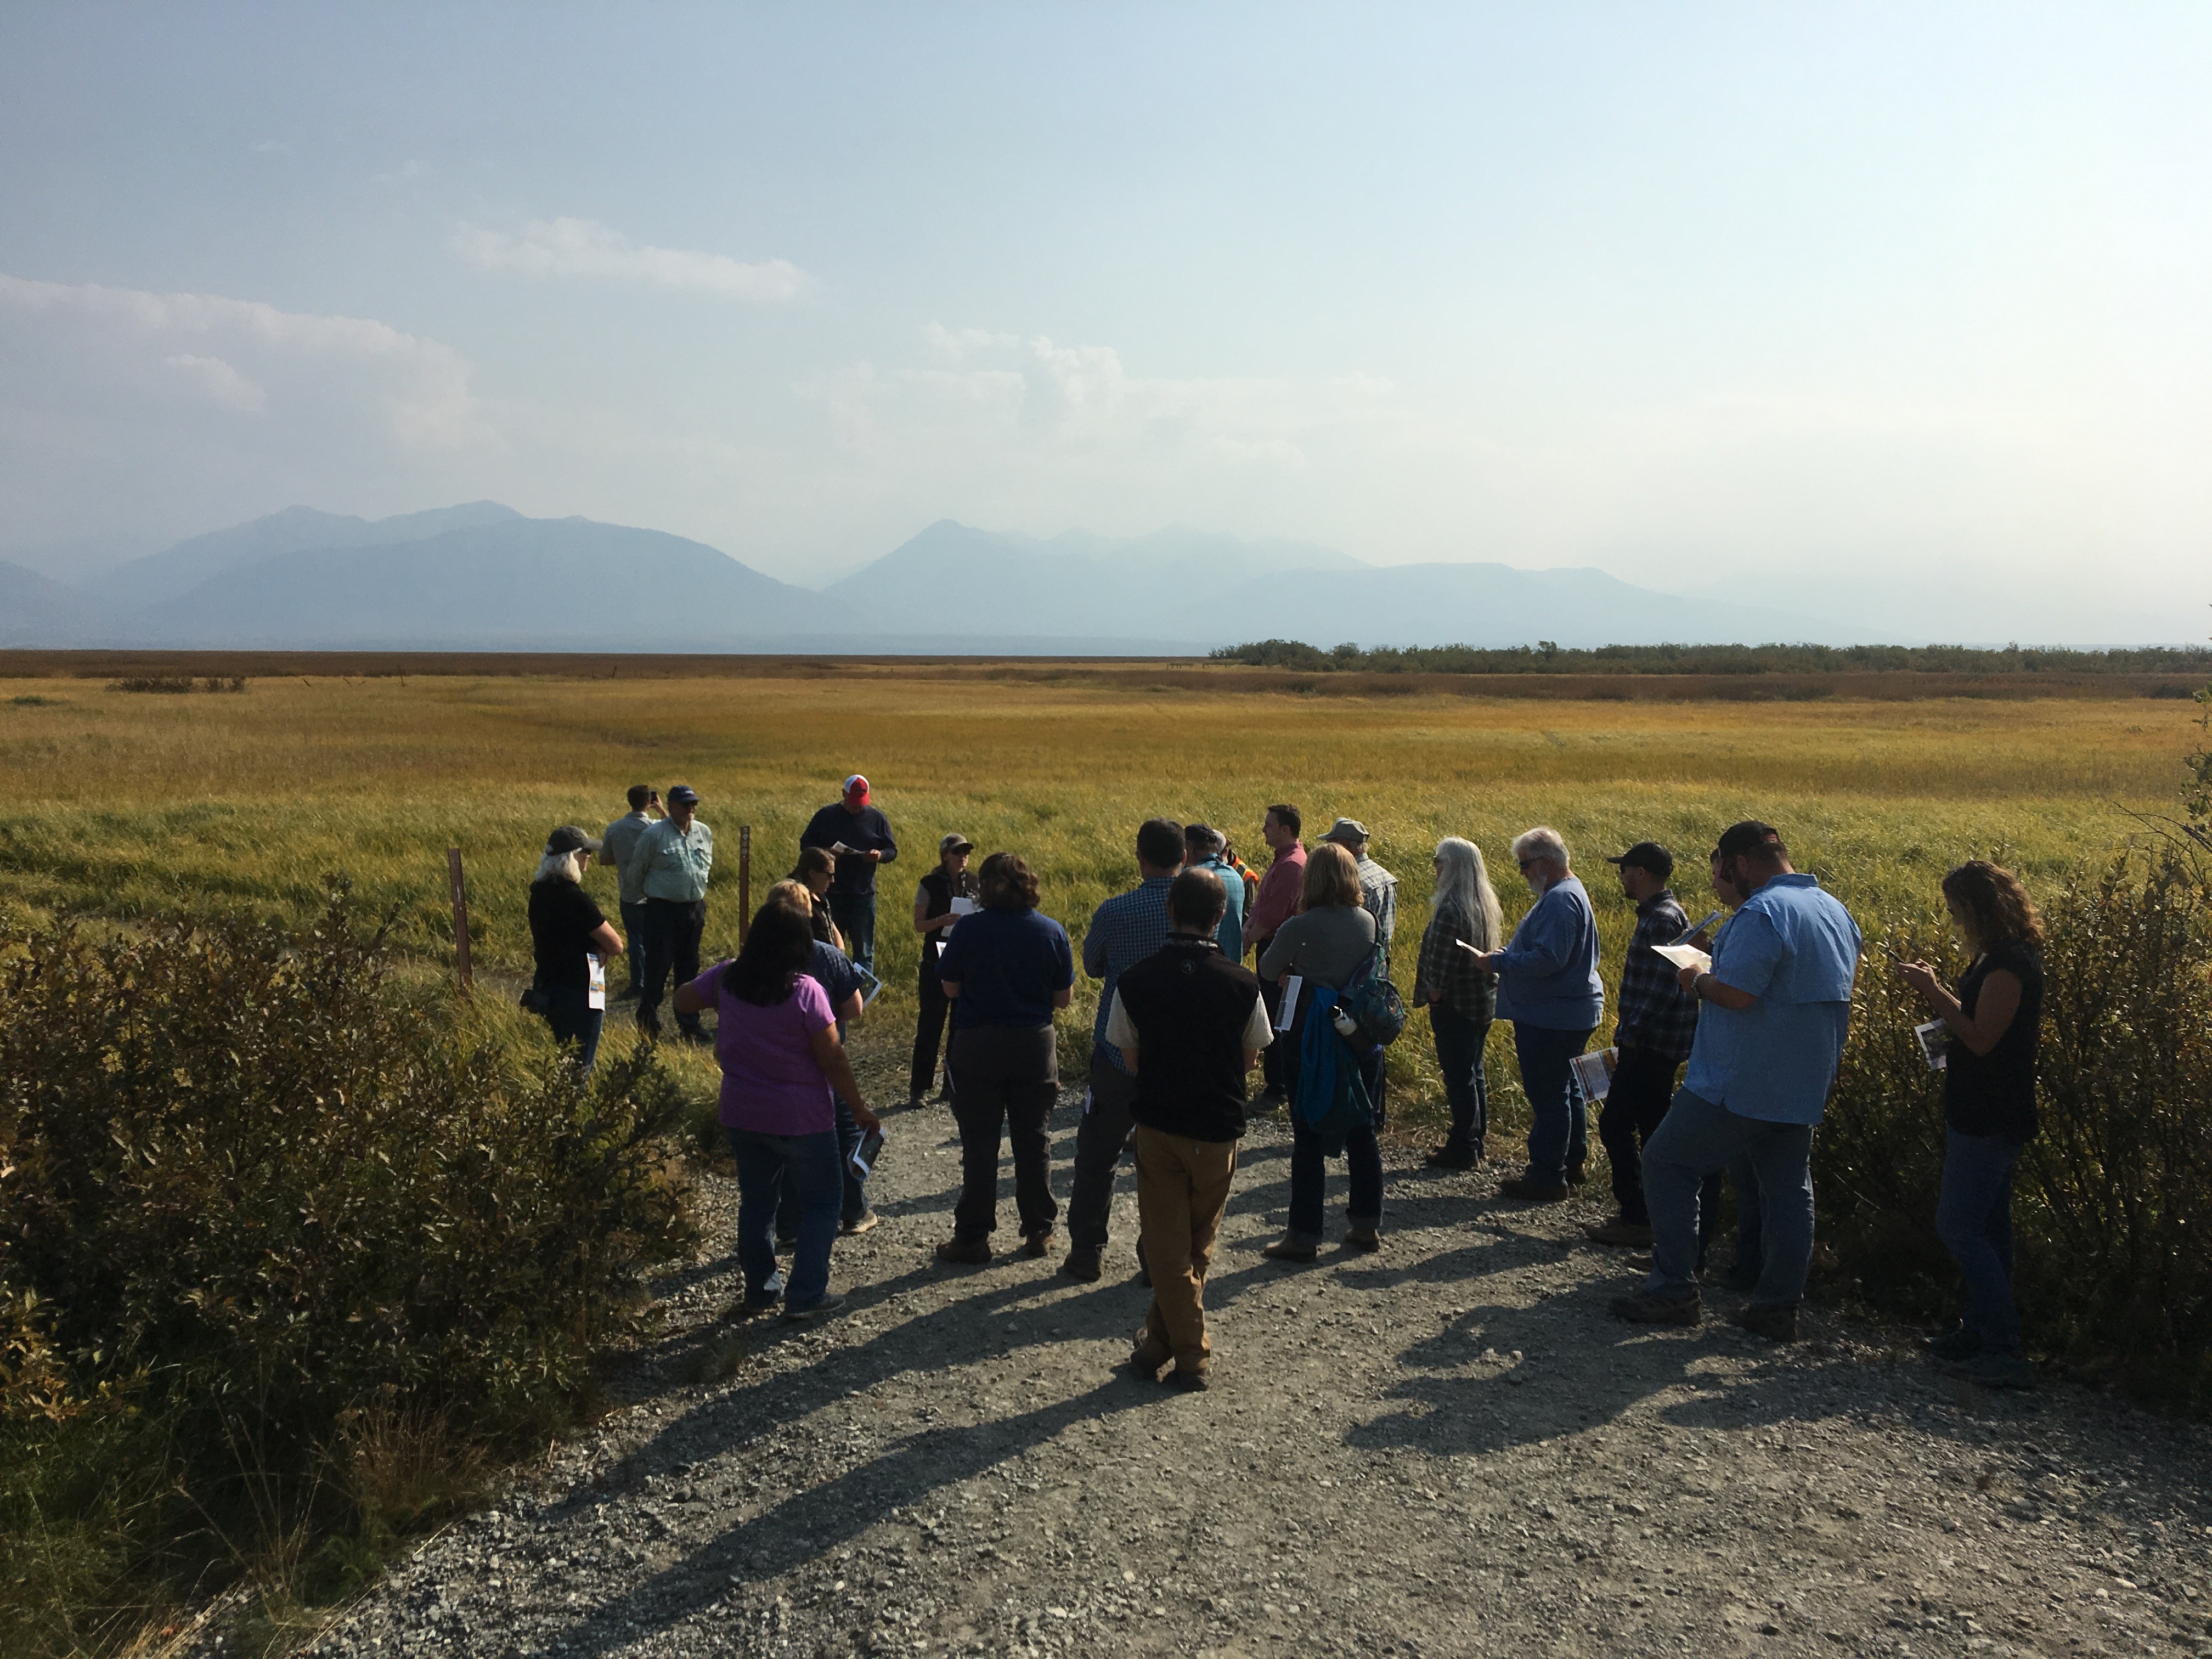 Staff from Great Land Trust talk about the value of conserving wetlands and shoreline habitat at the Palmer Hay Flats